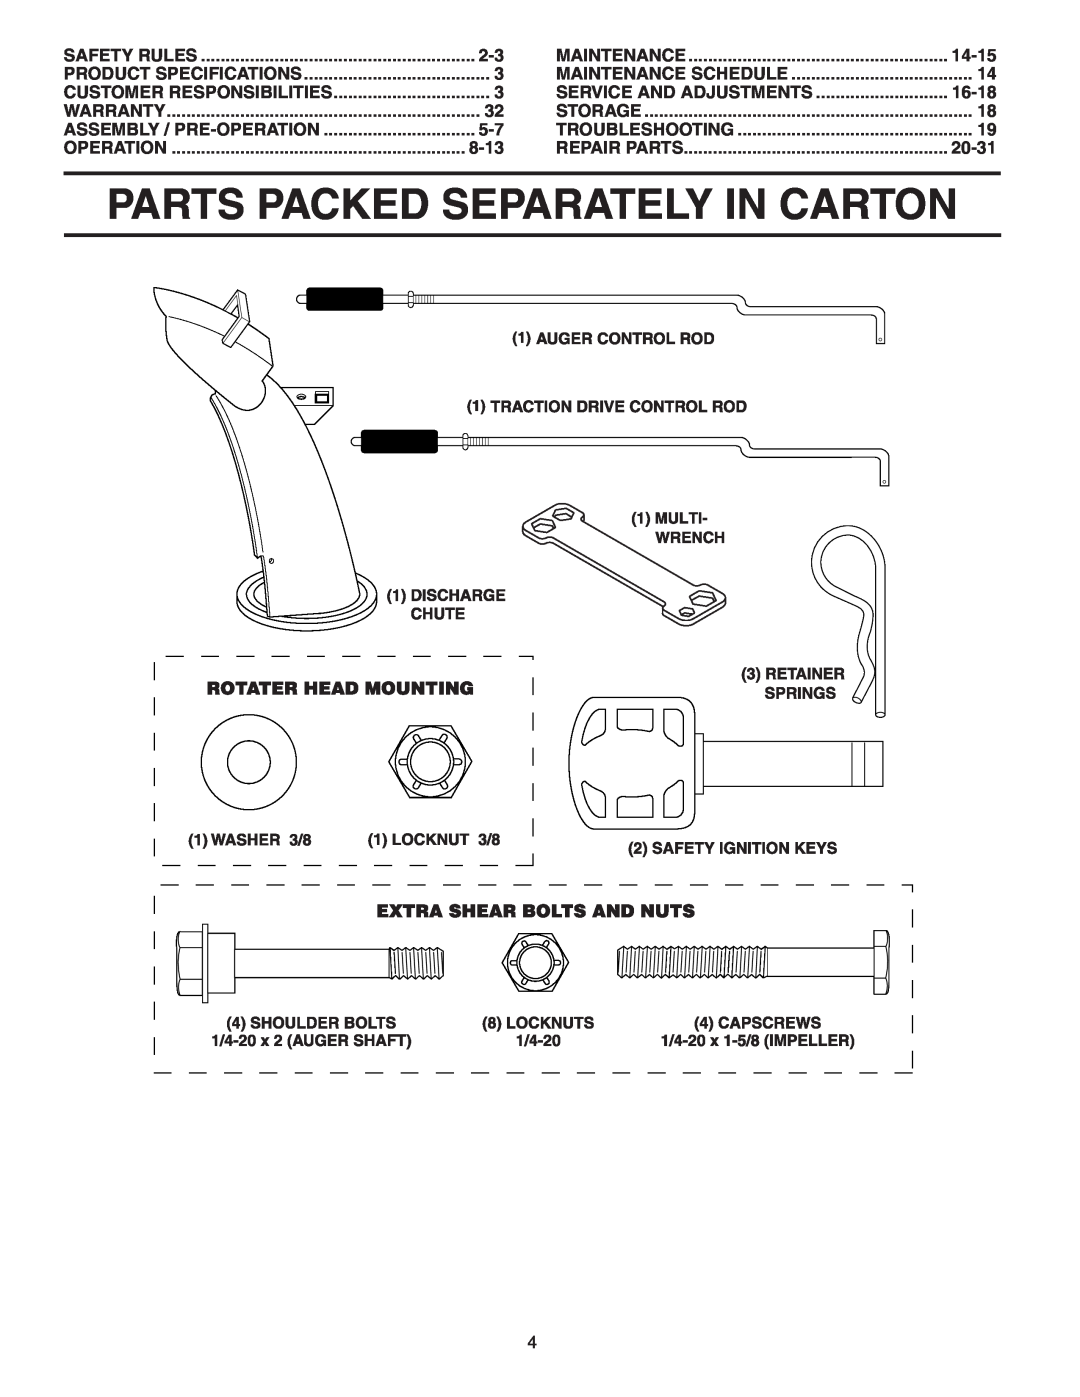 Poulan PP8527ESB Parts Packed Separately In Carton, 8-13, 14-15, Service And Adjustments, 16-18, 20-31, Safety Rules 